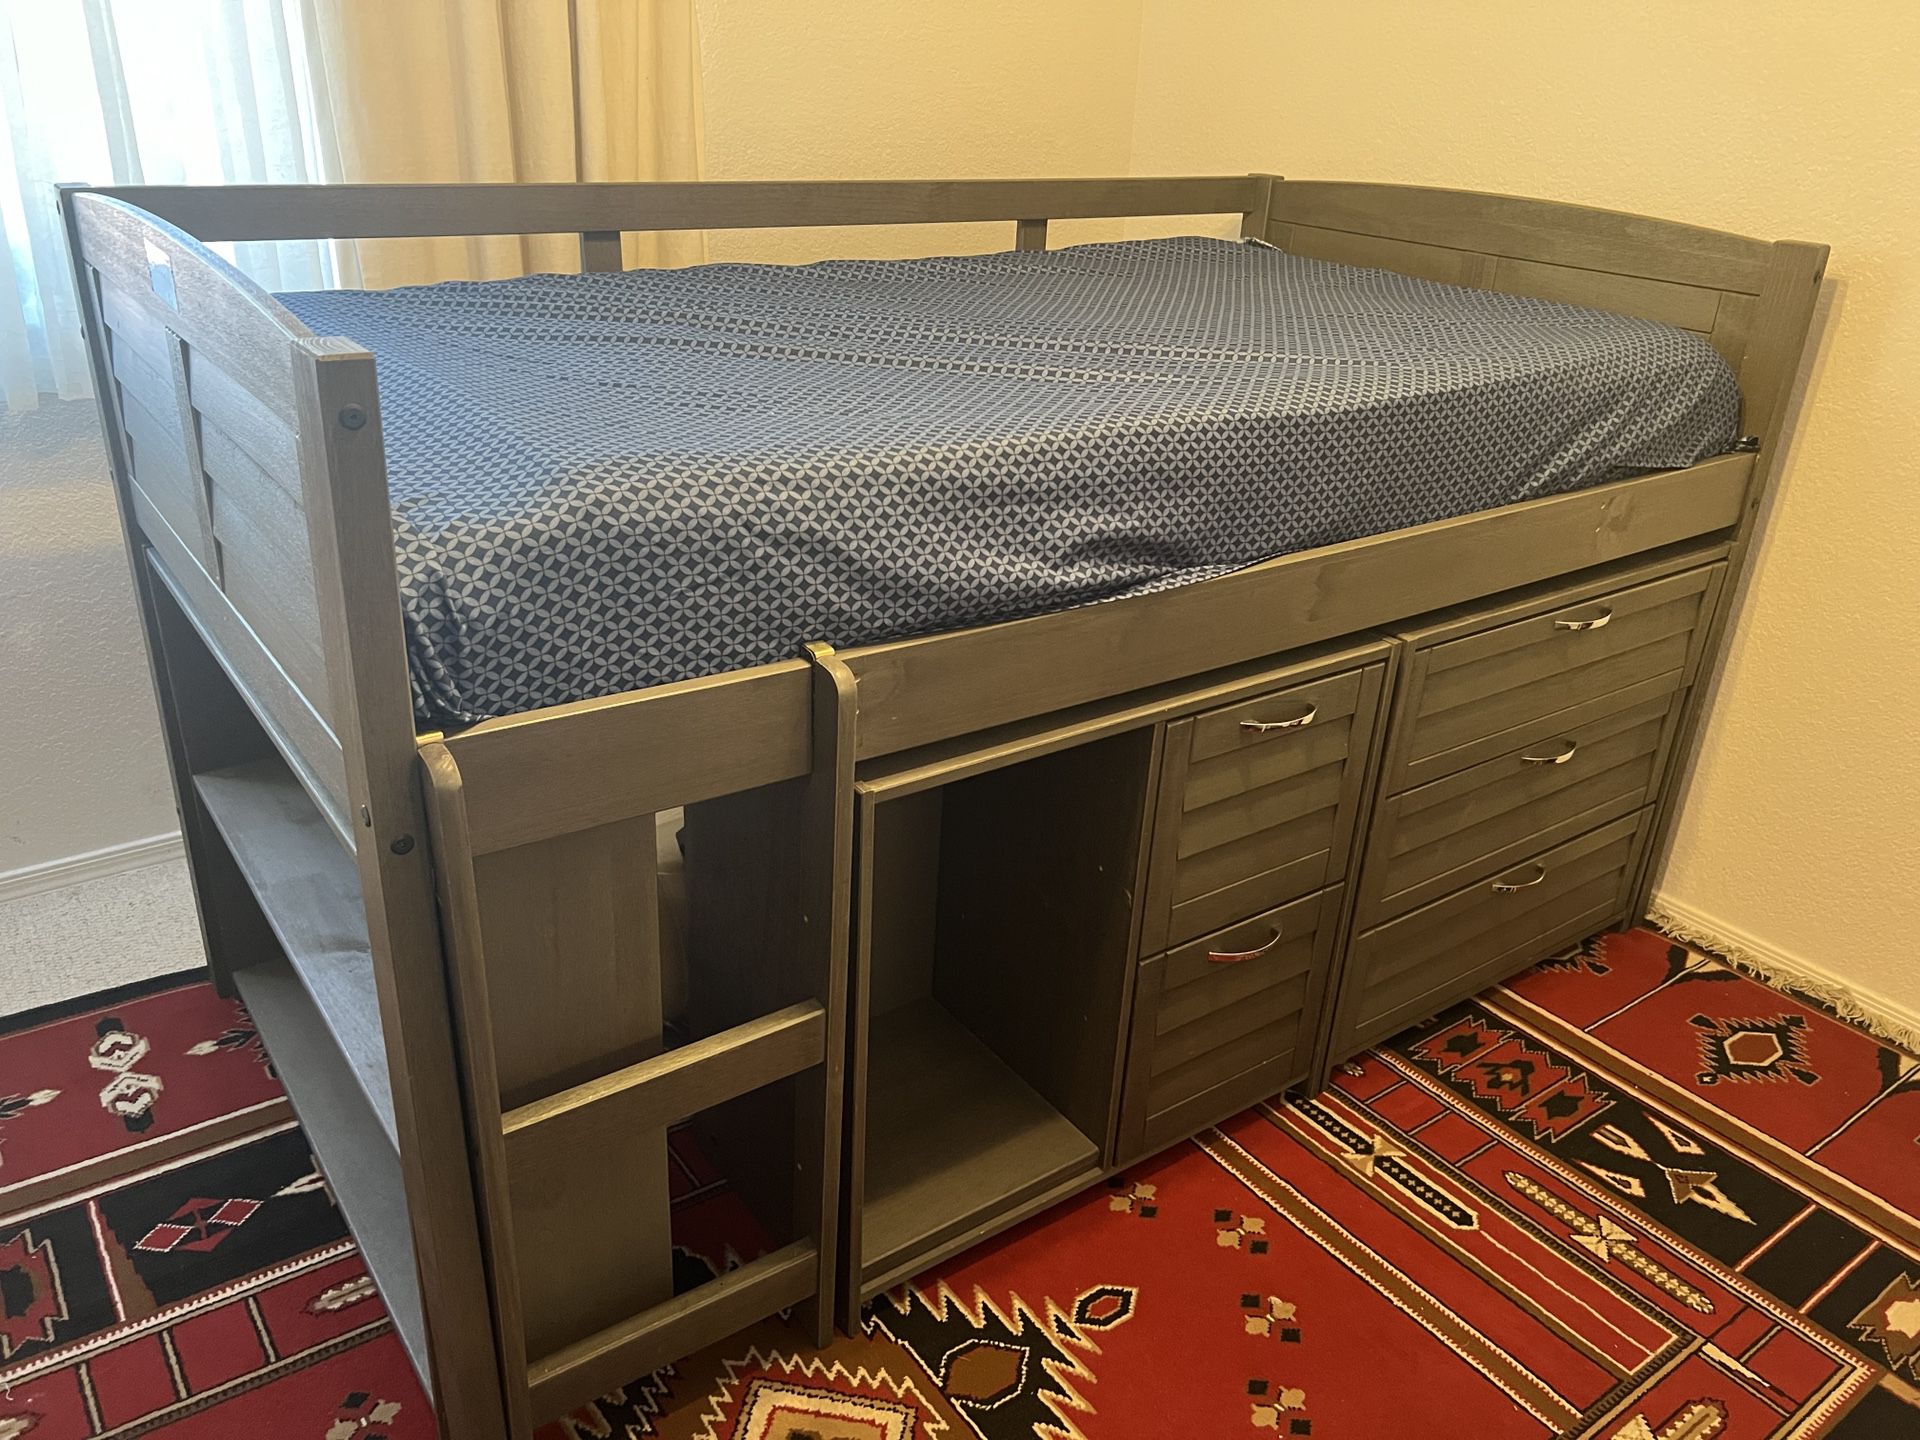 Bunk Bed/captains Bed (with Twin Mattress)